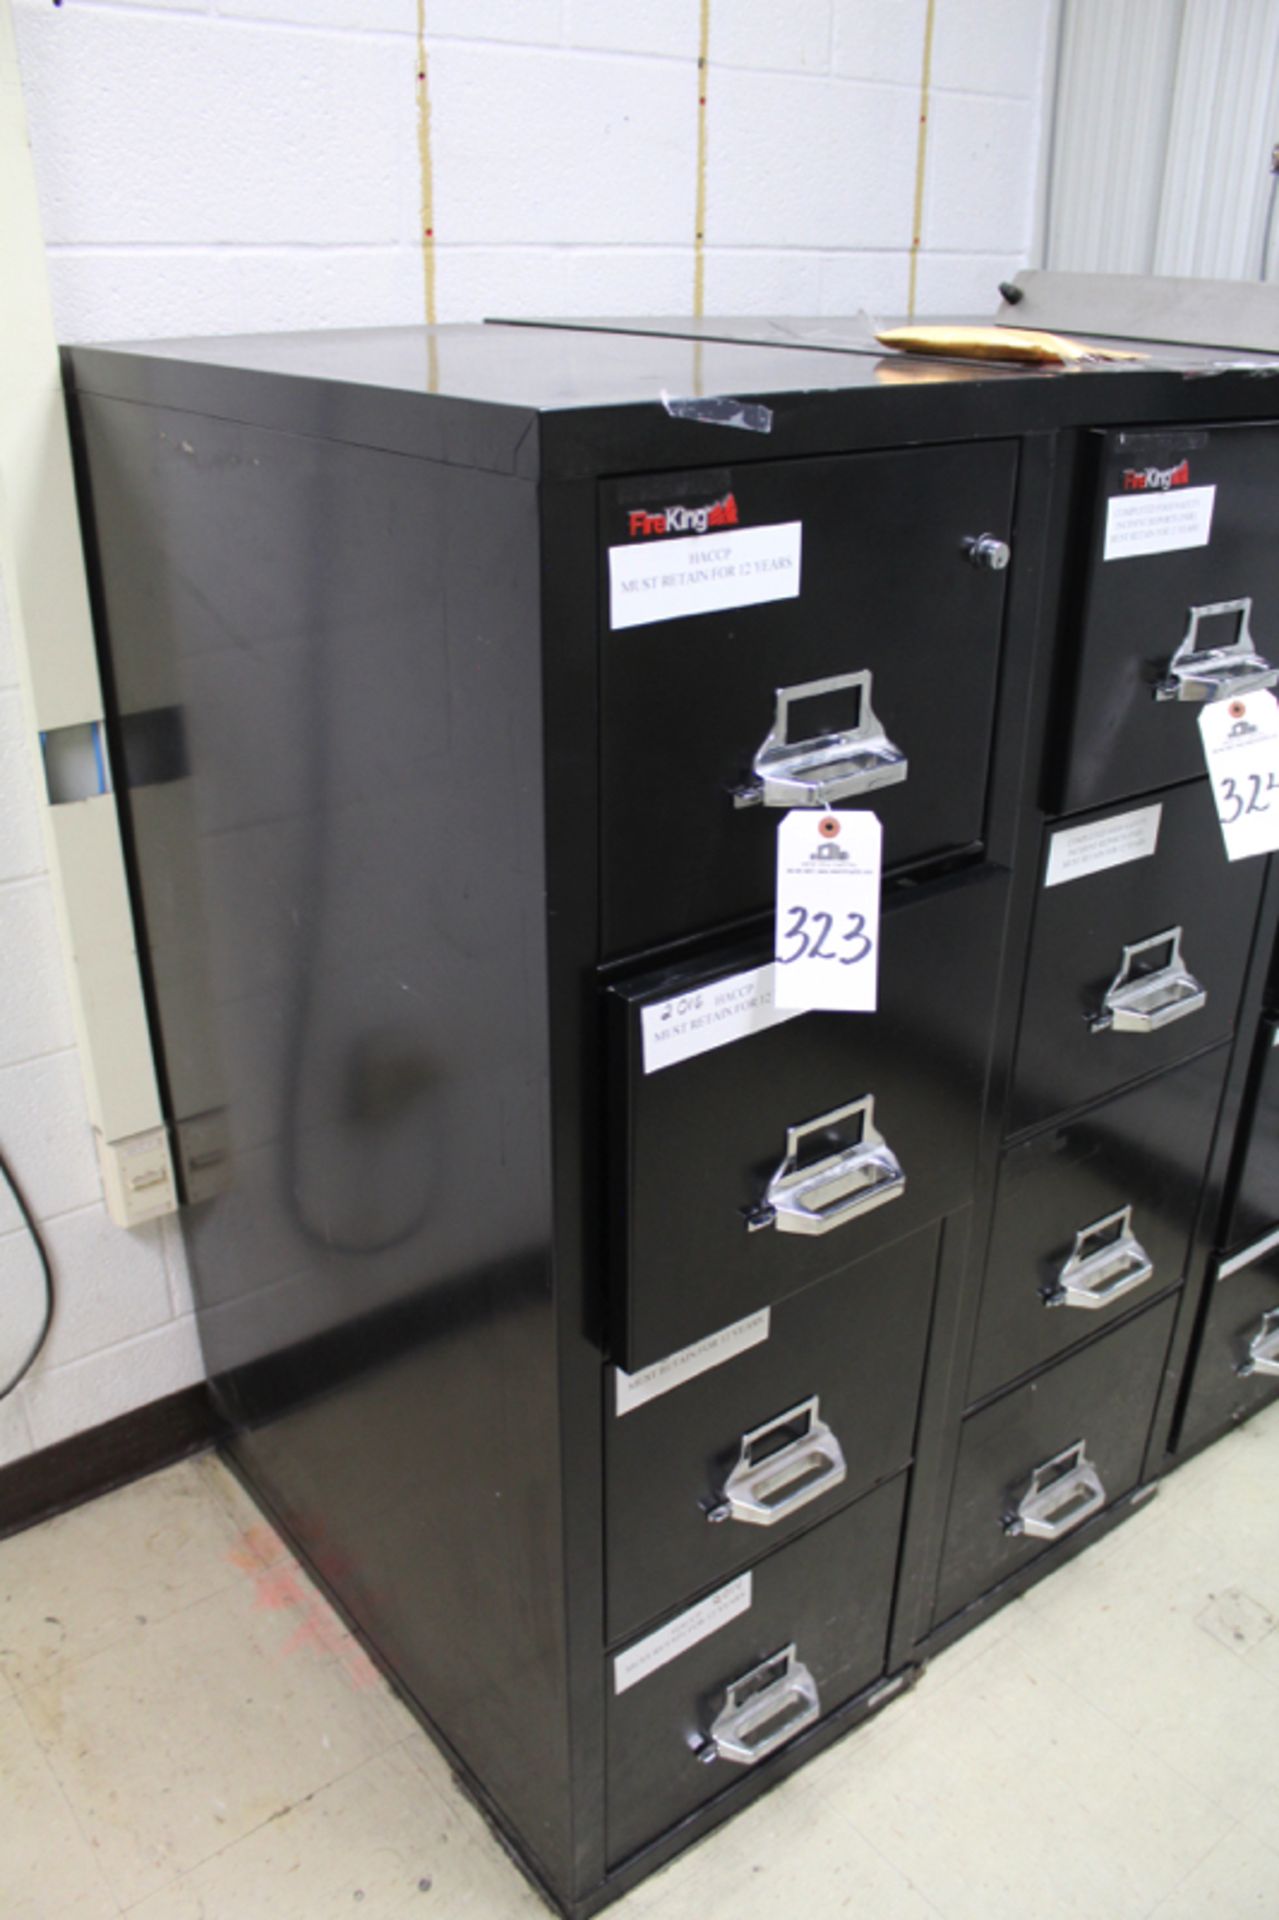 Fire King 4 Drawer File Cabinet | Location: Dryer Room | Rigging Price: $50